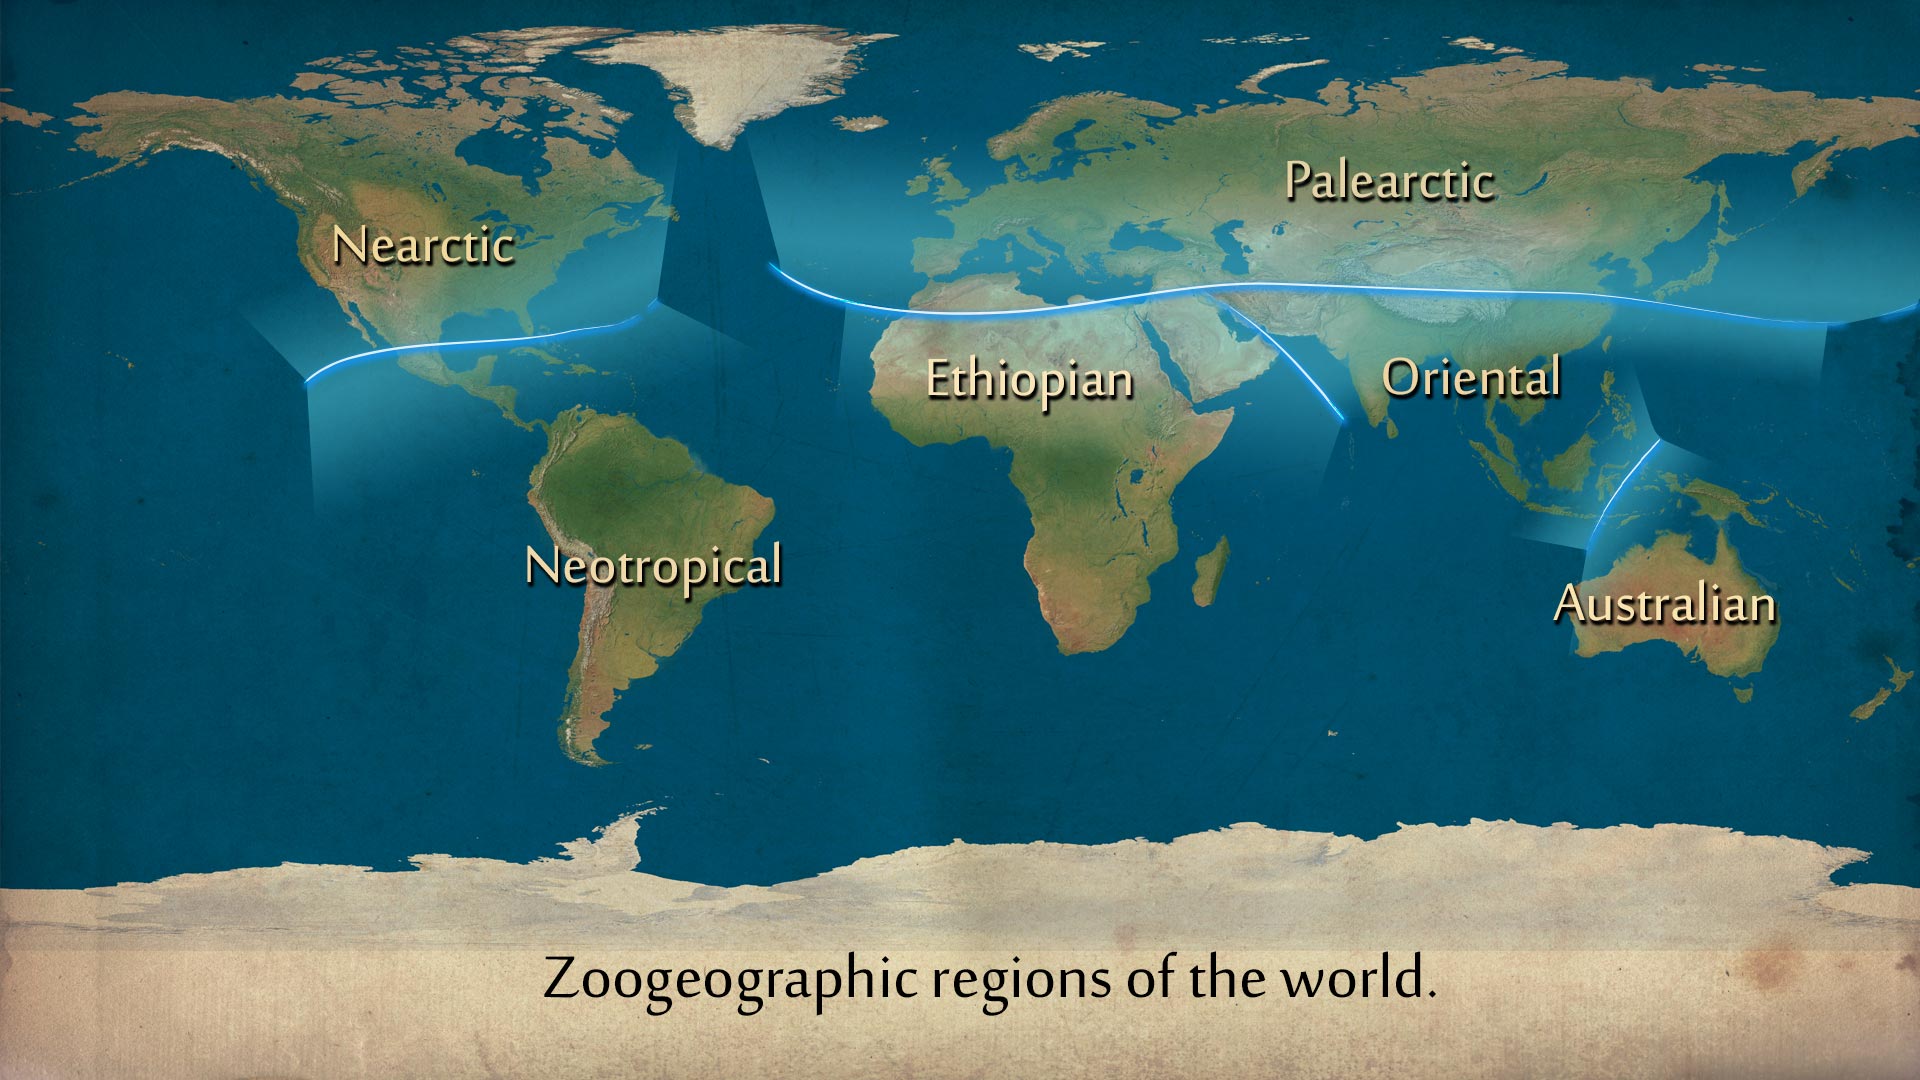 Sclater's zoogeographic divisions